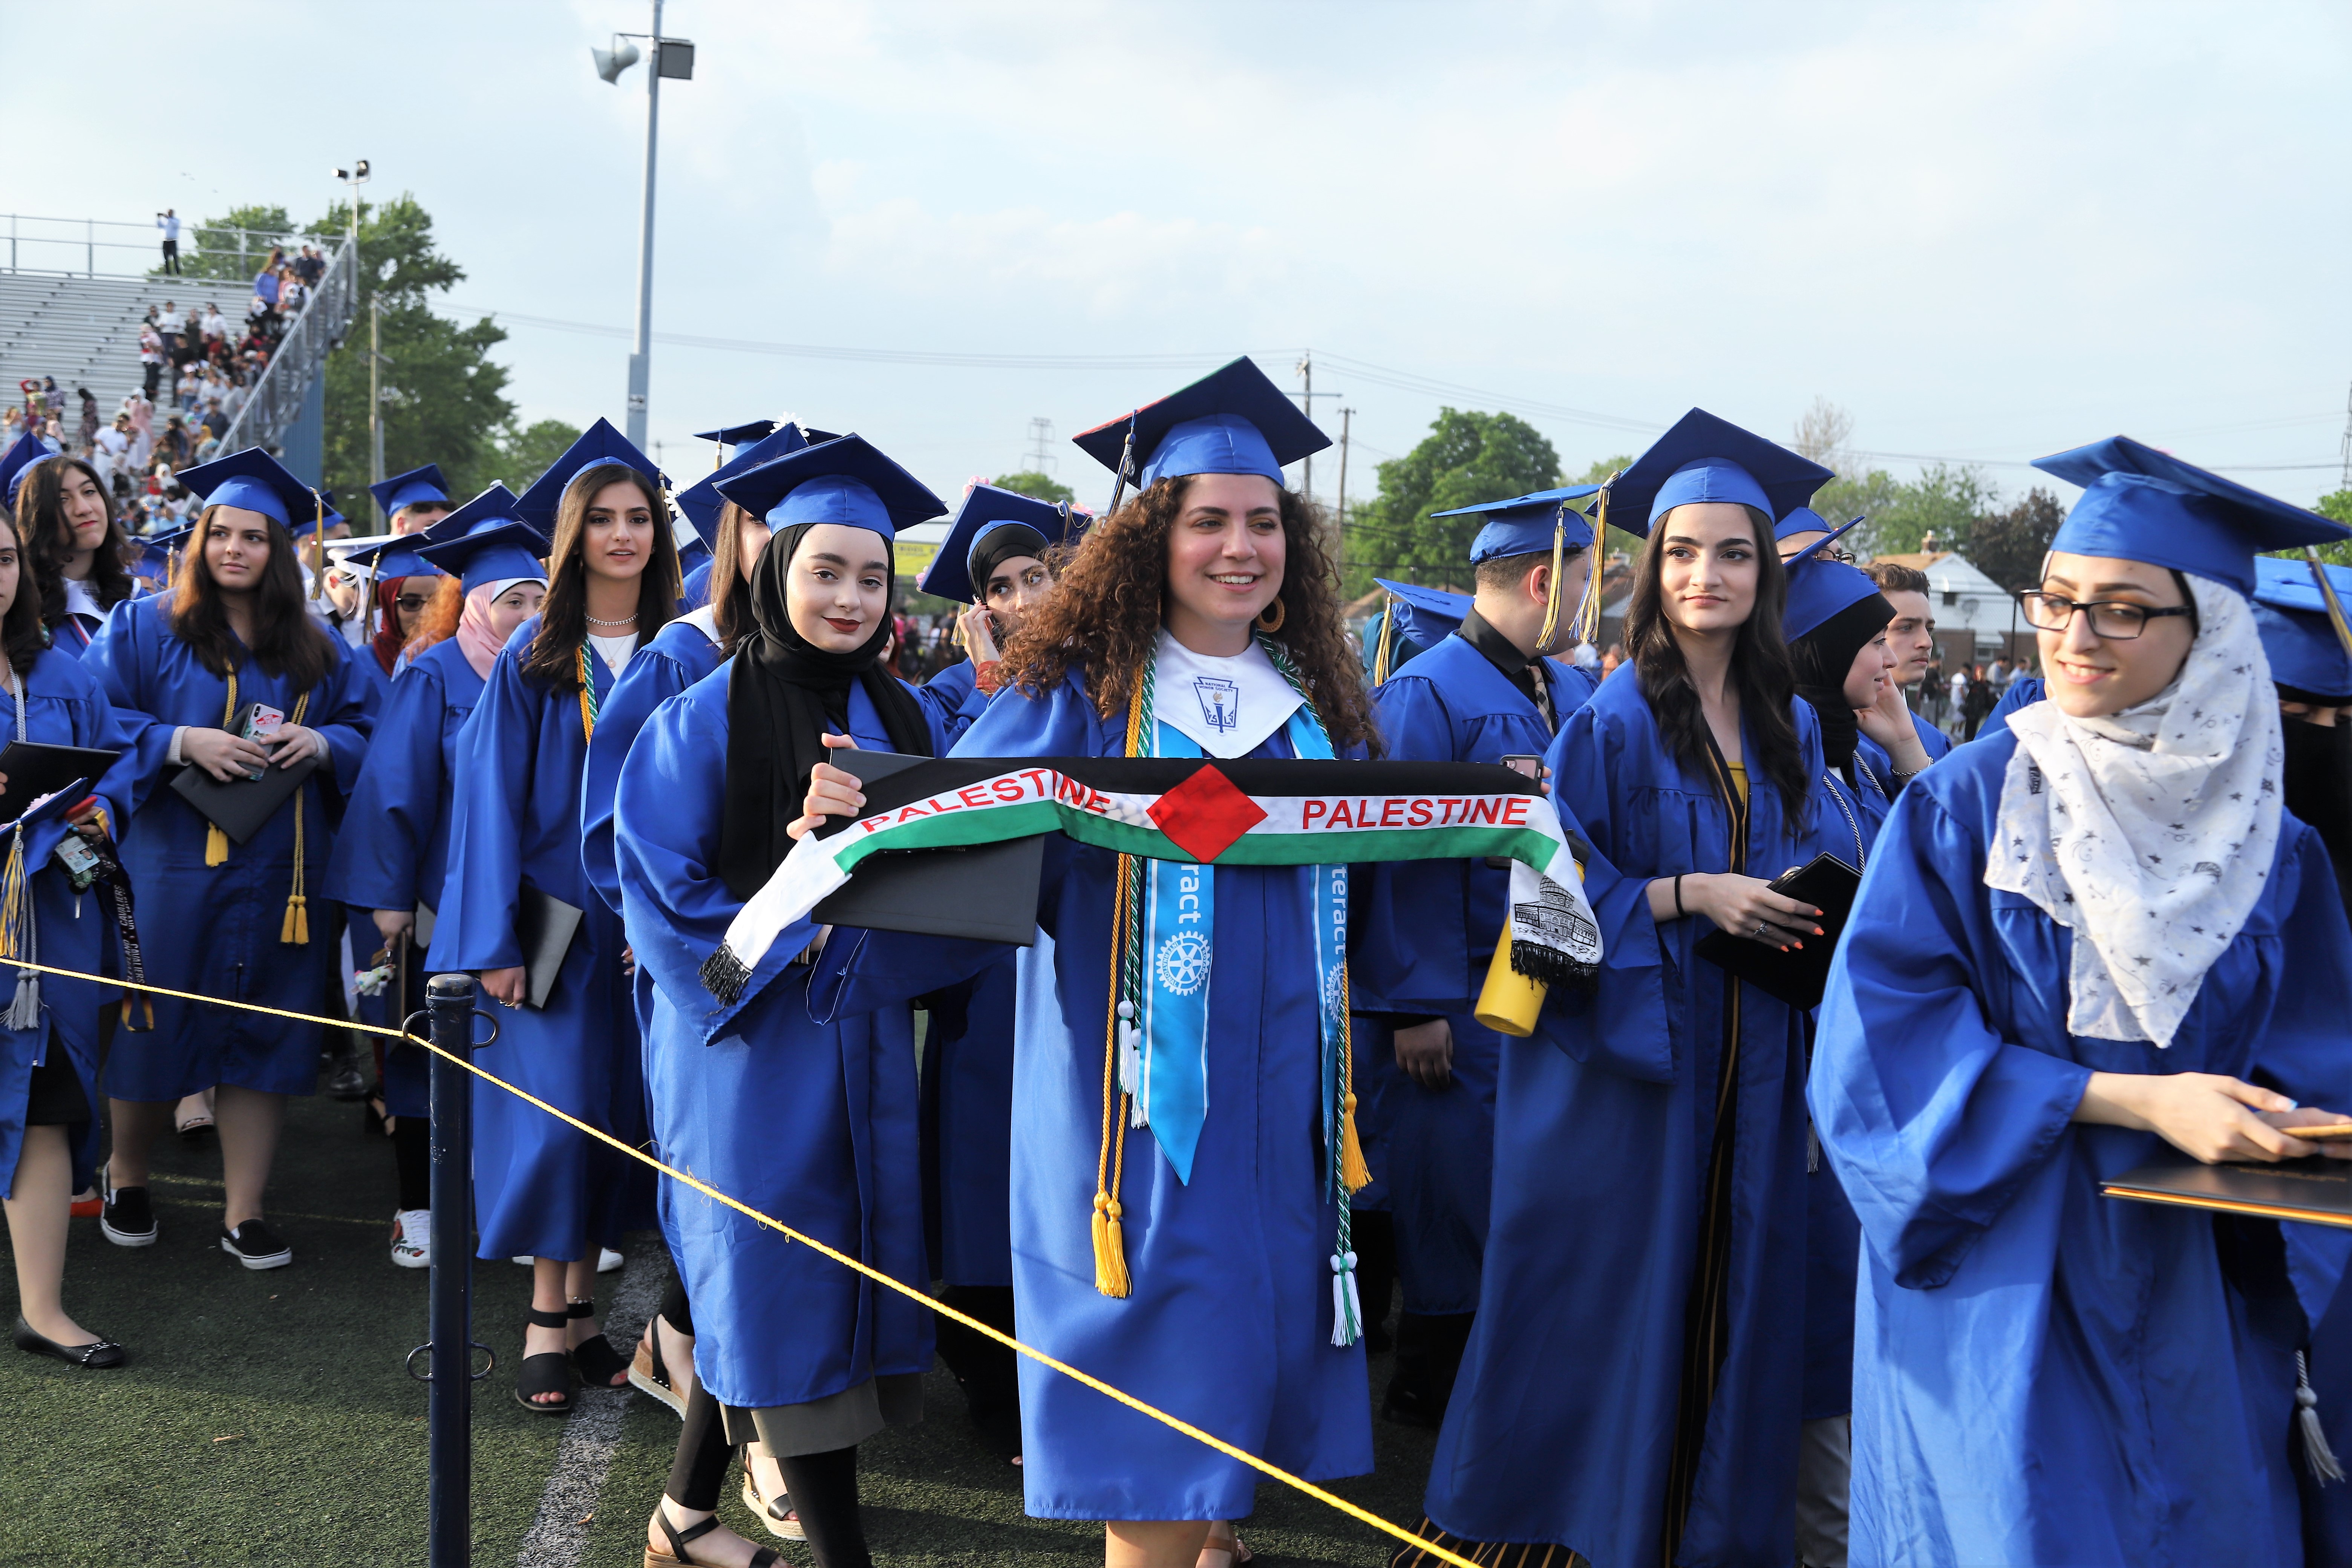 dearborn-public-schools-classes-of-2019-are-at-an-all-time-high